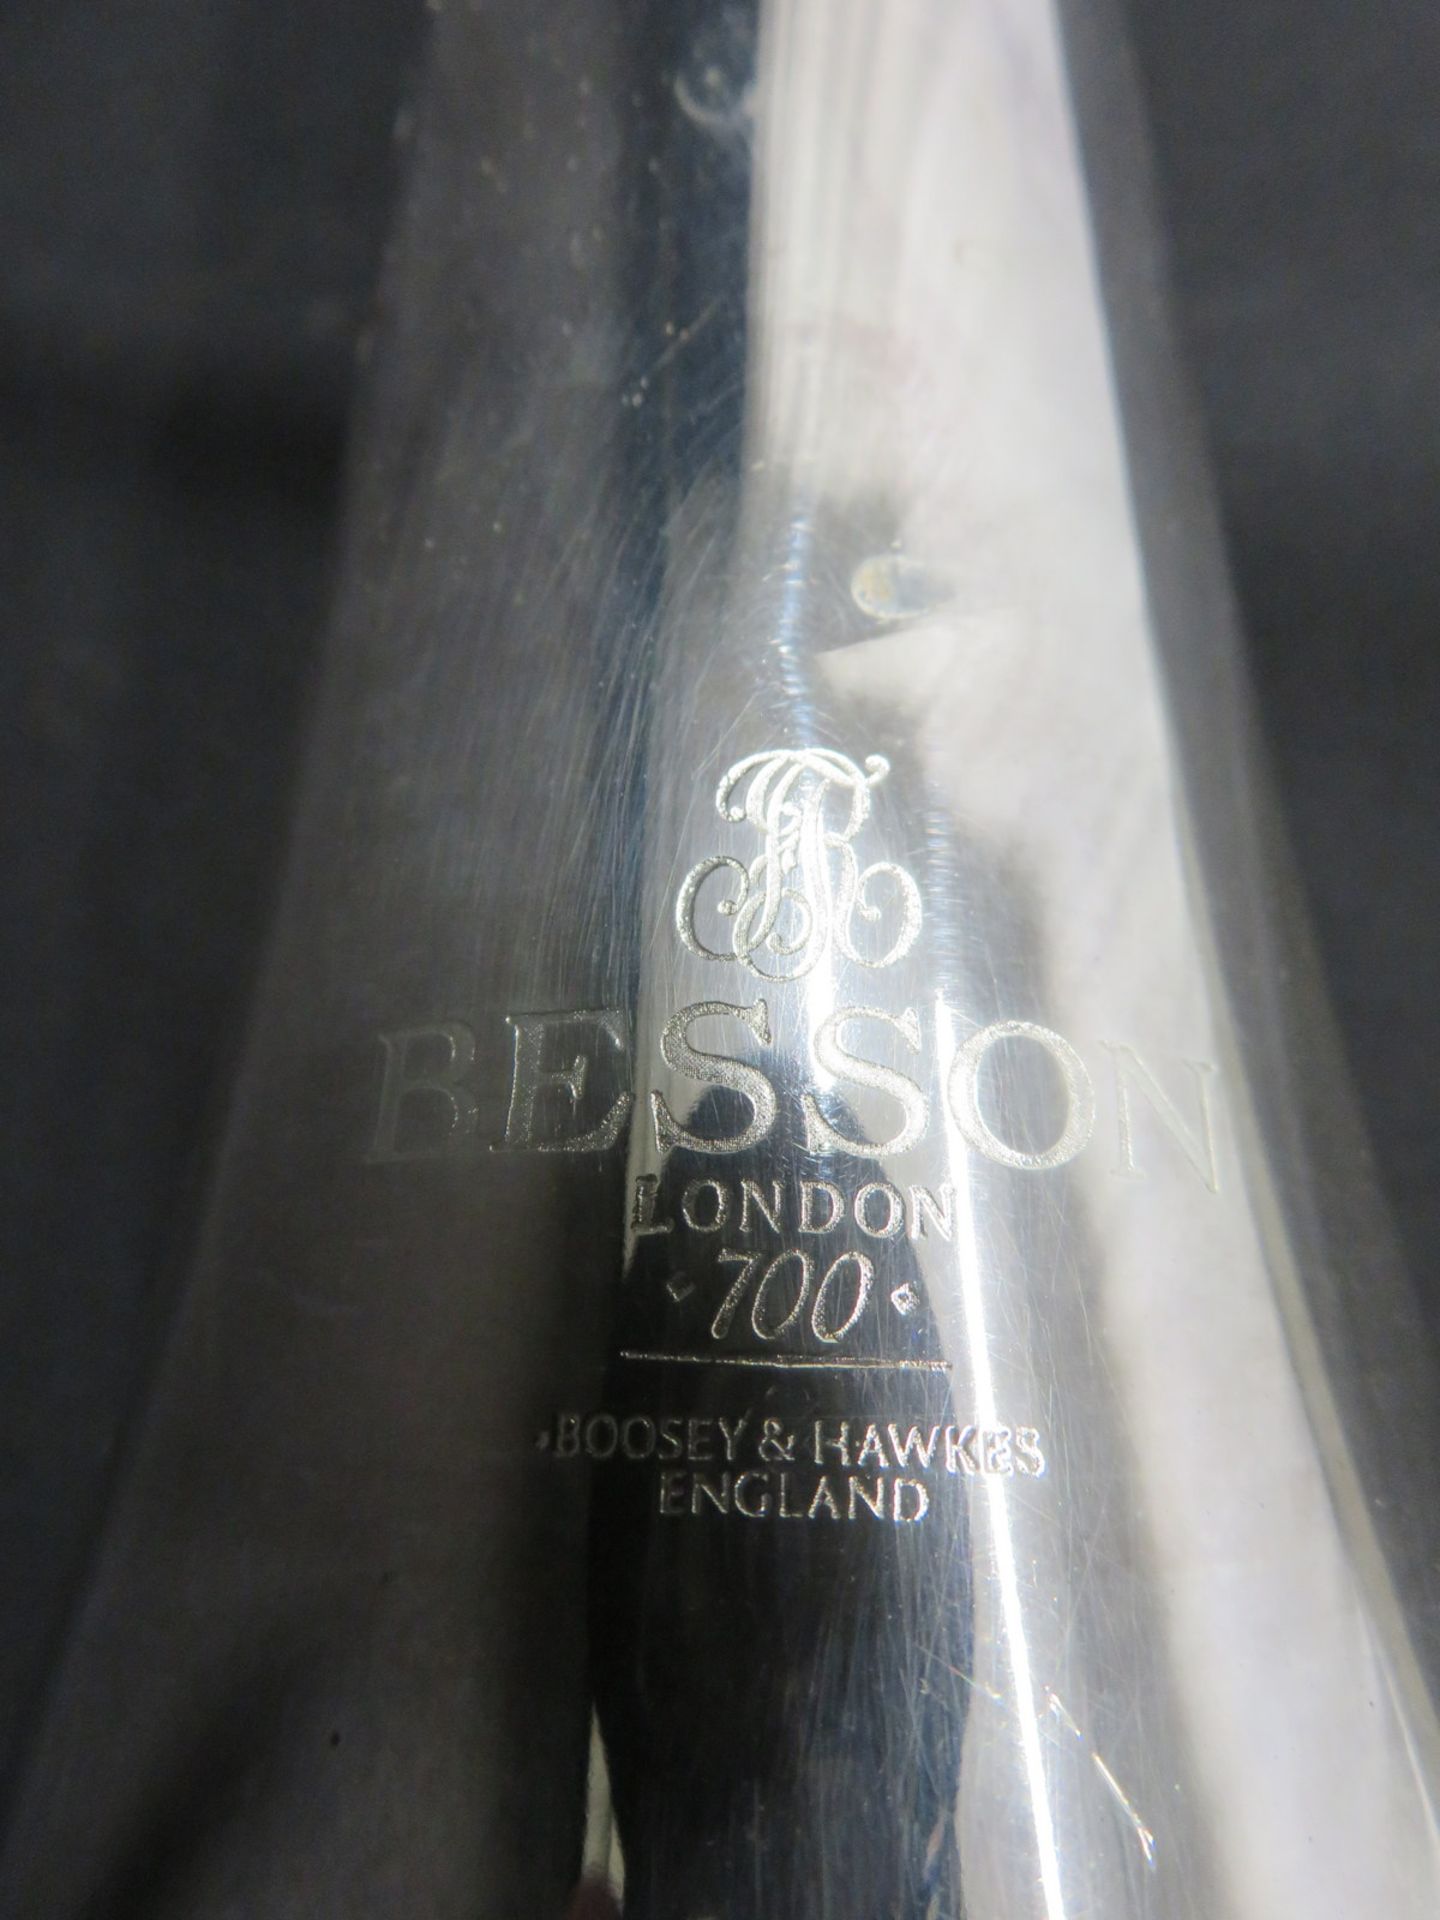 Boosey & Hawkes Besson 700 London tenor fanfare trumpet with case. Serial number: 707-721126. - Bild 11 aus 18